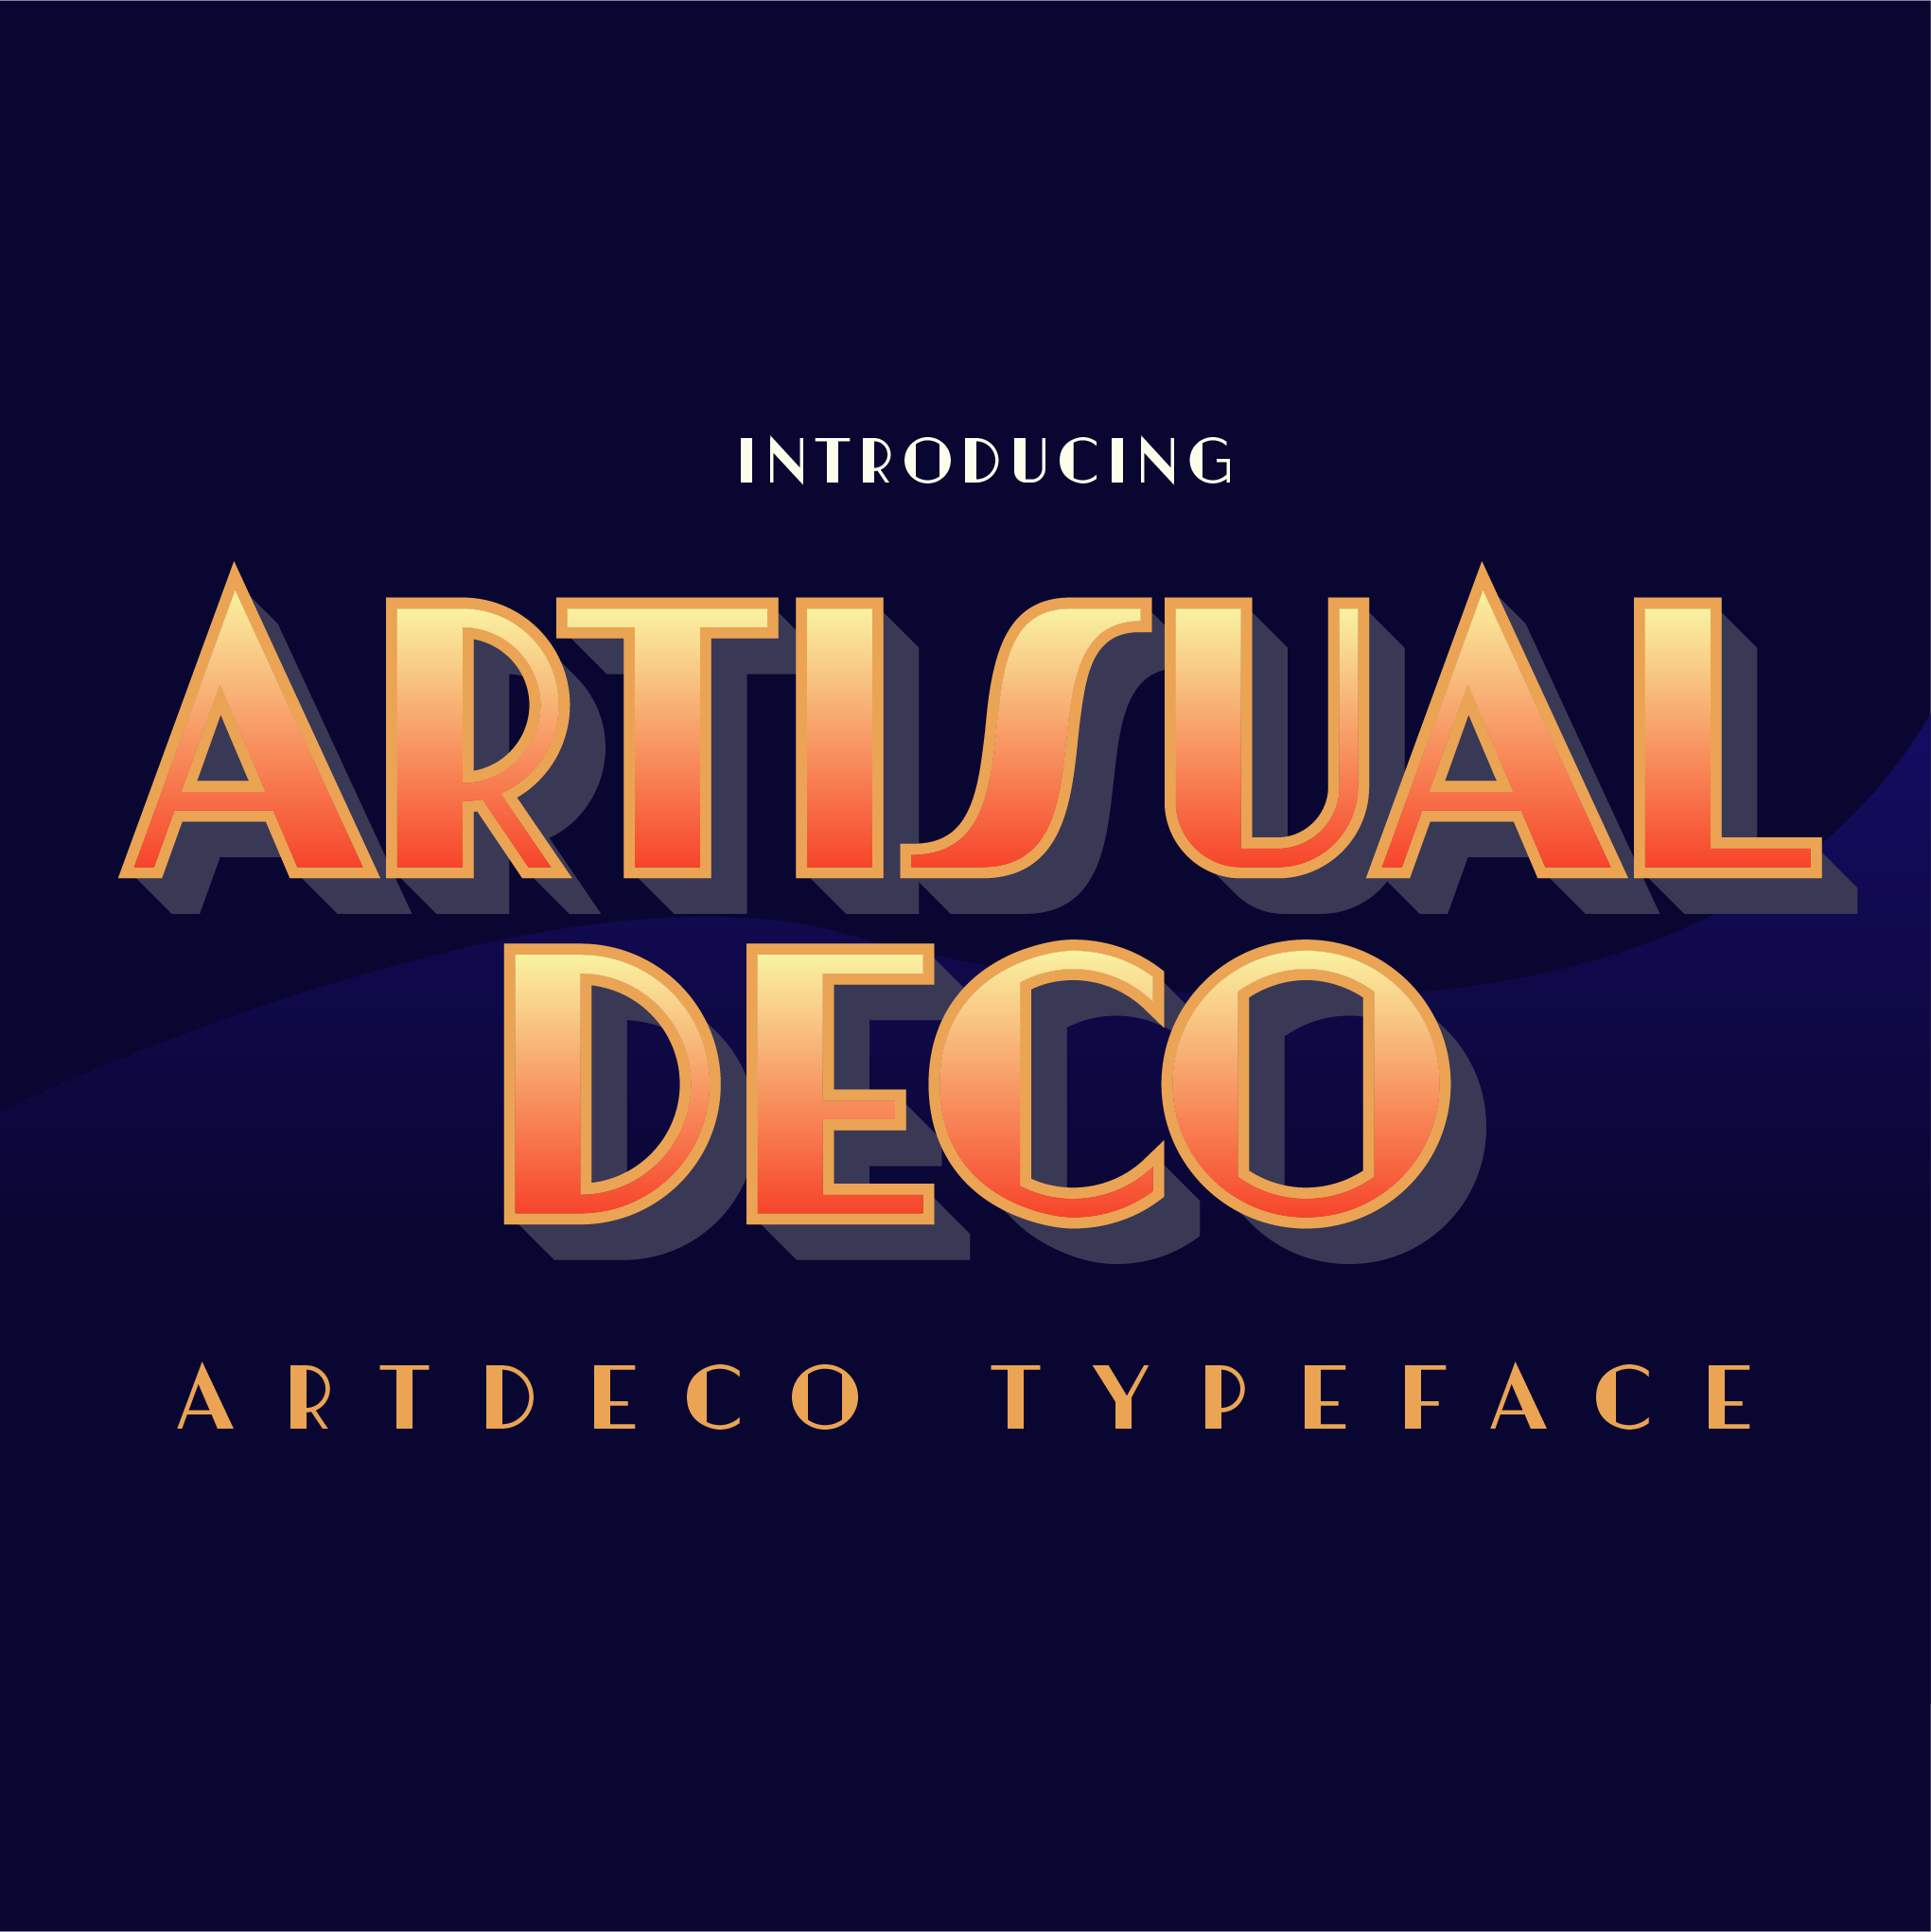 Artisual Deco Black PERSONAL USE ONLY PERSONAL USE ONLY